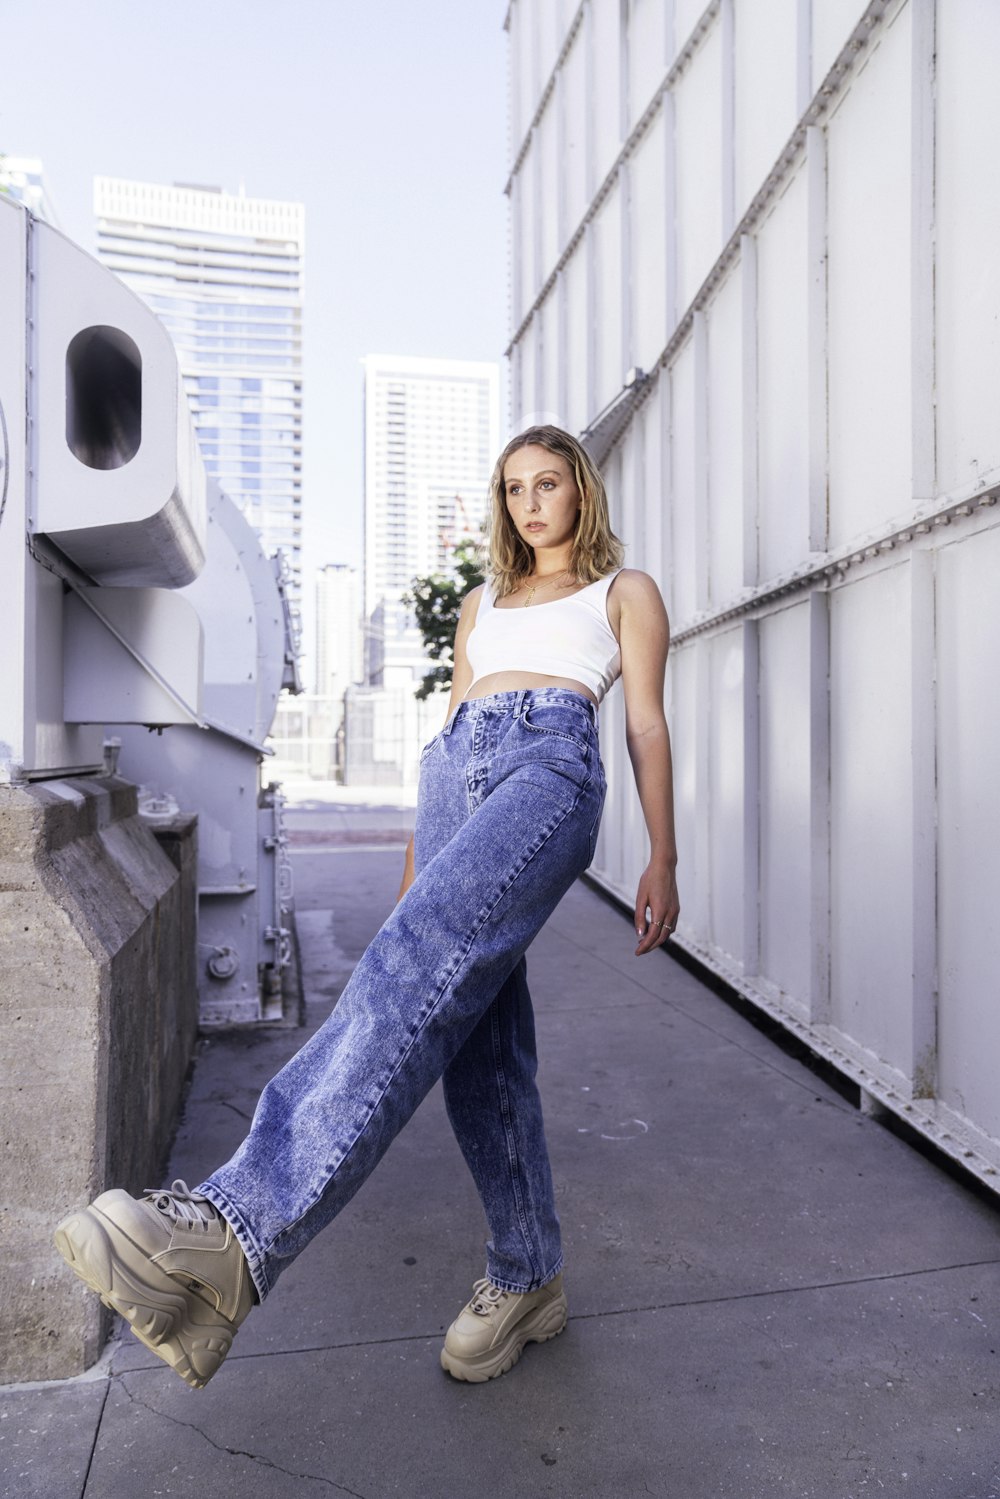 woman in blue denim jeans standing on gray concrete floor during daytime